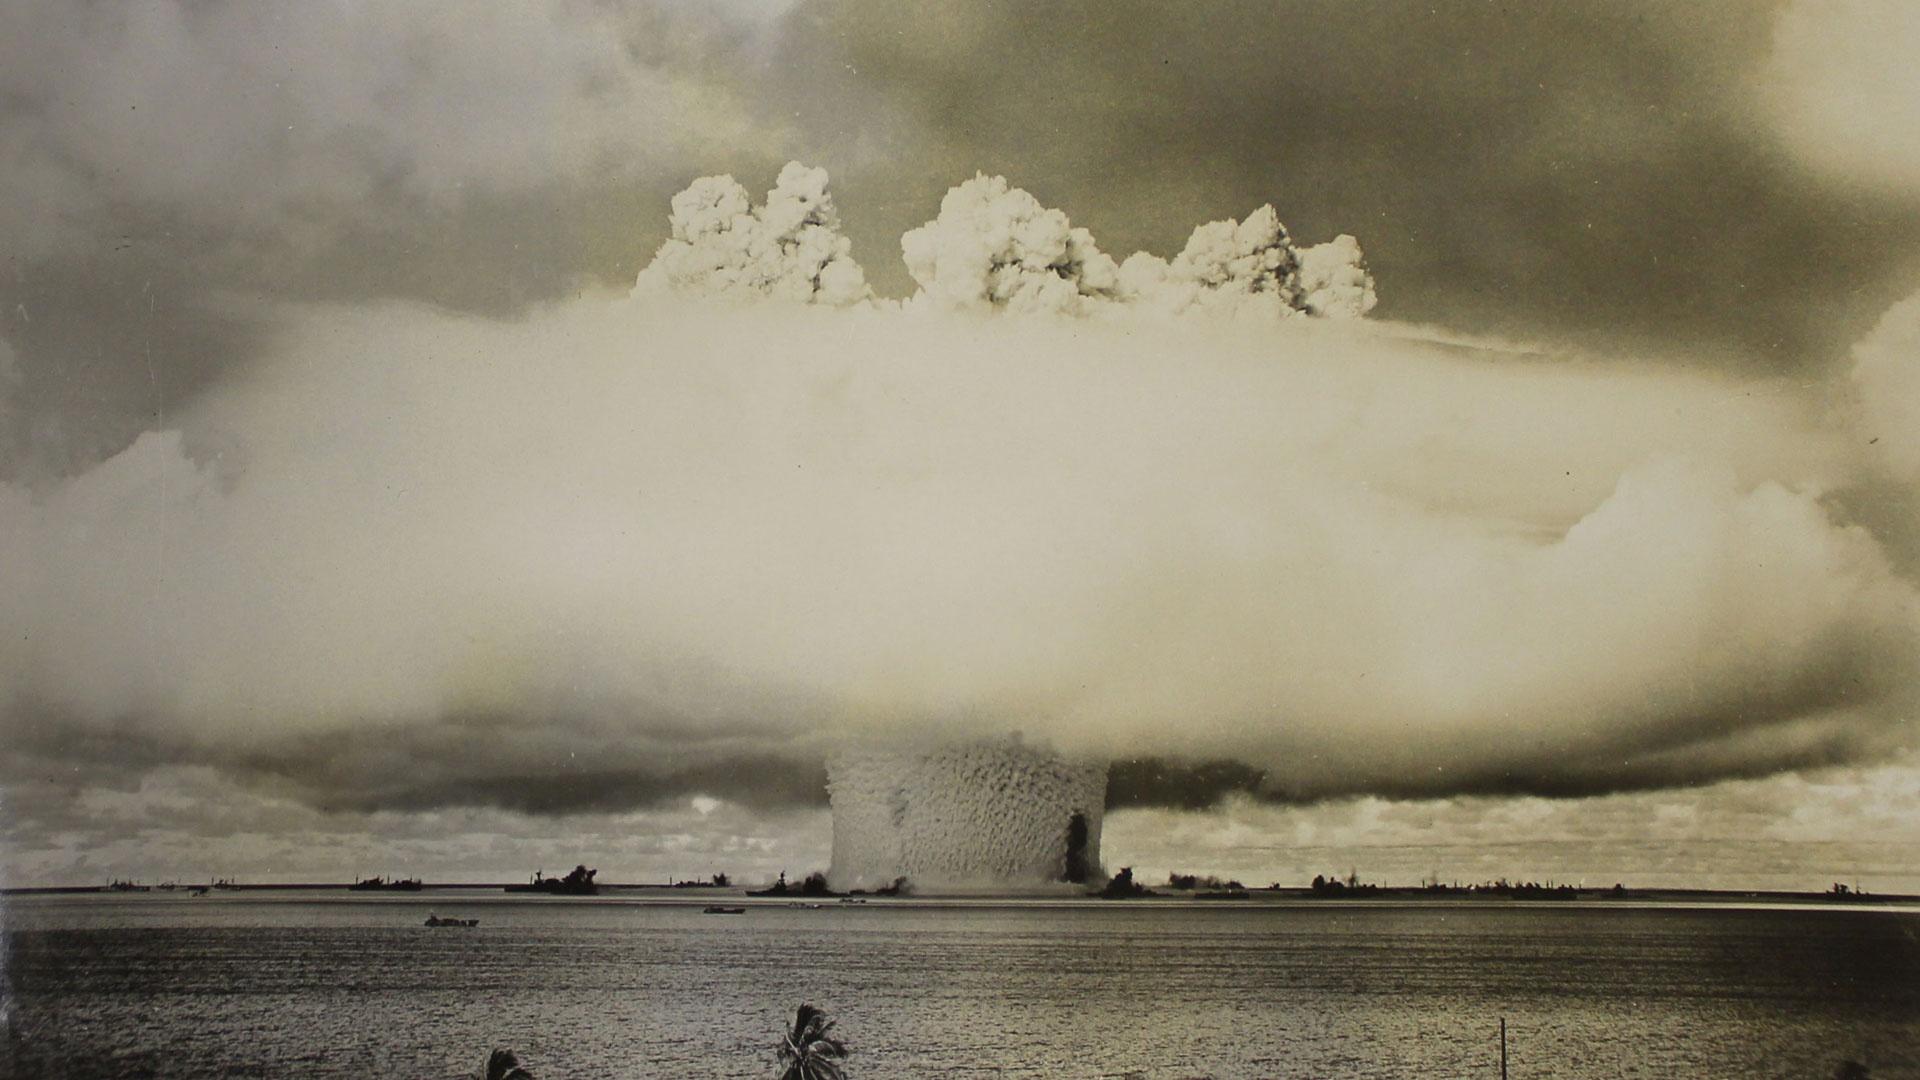 The Baker Day explosion, part of Crossroads Atomic Testing.